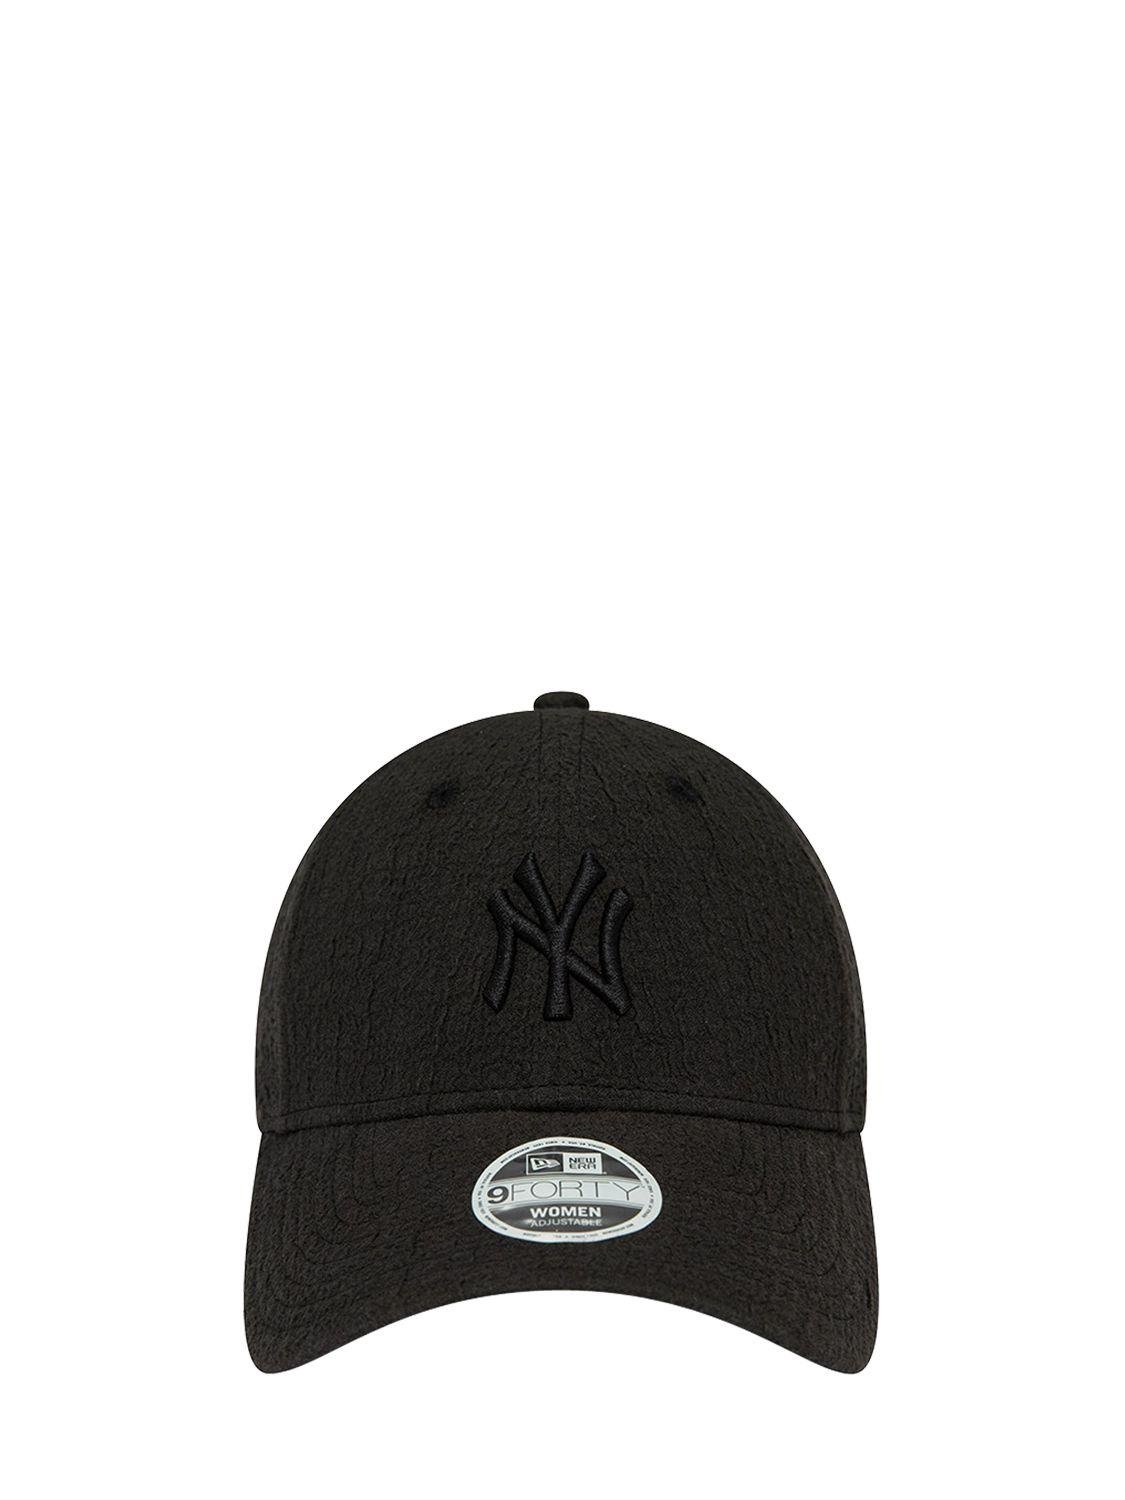 Ny Yankees Bubble Stitch 9forty Hat by NEW ERA